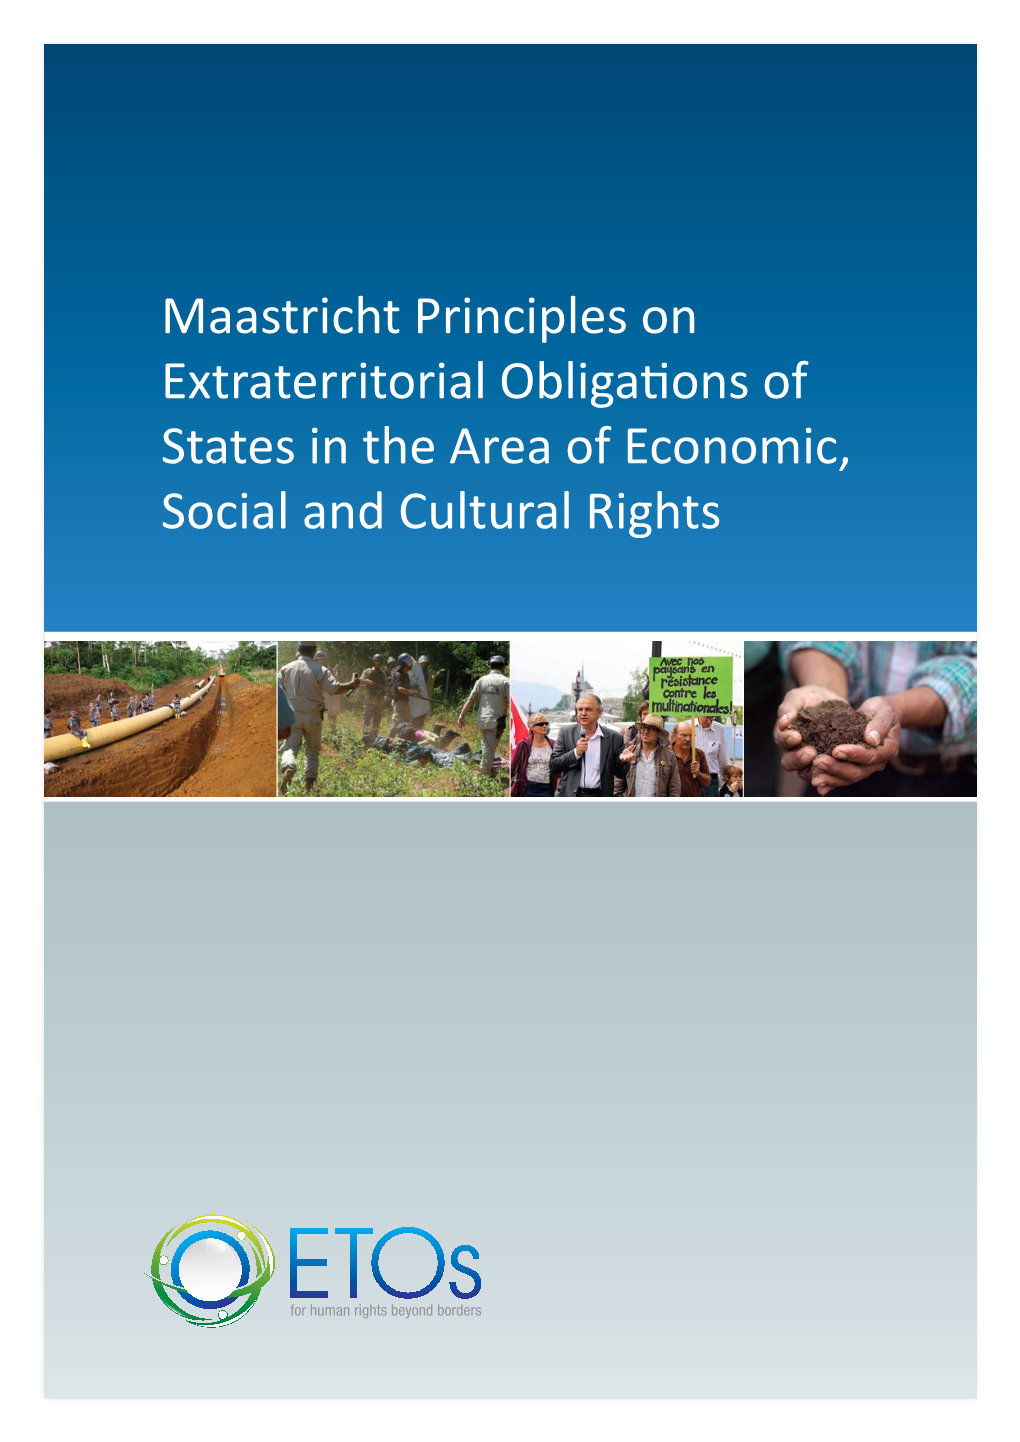 Maastricht Principles on Extraterritorial Obligations of States in the Area Of